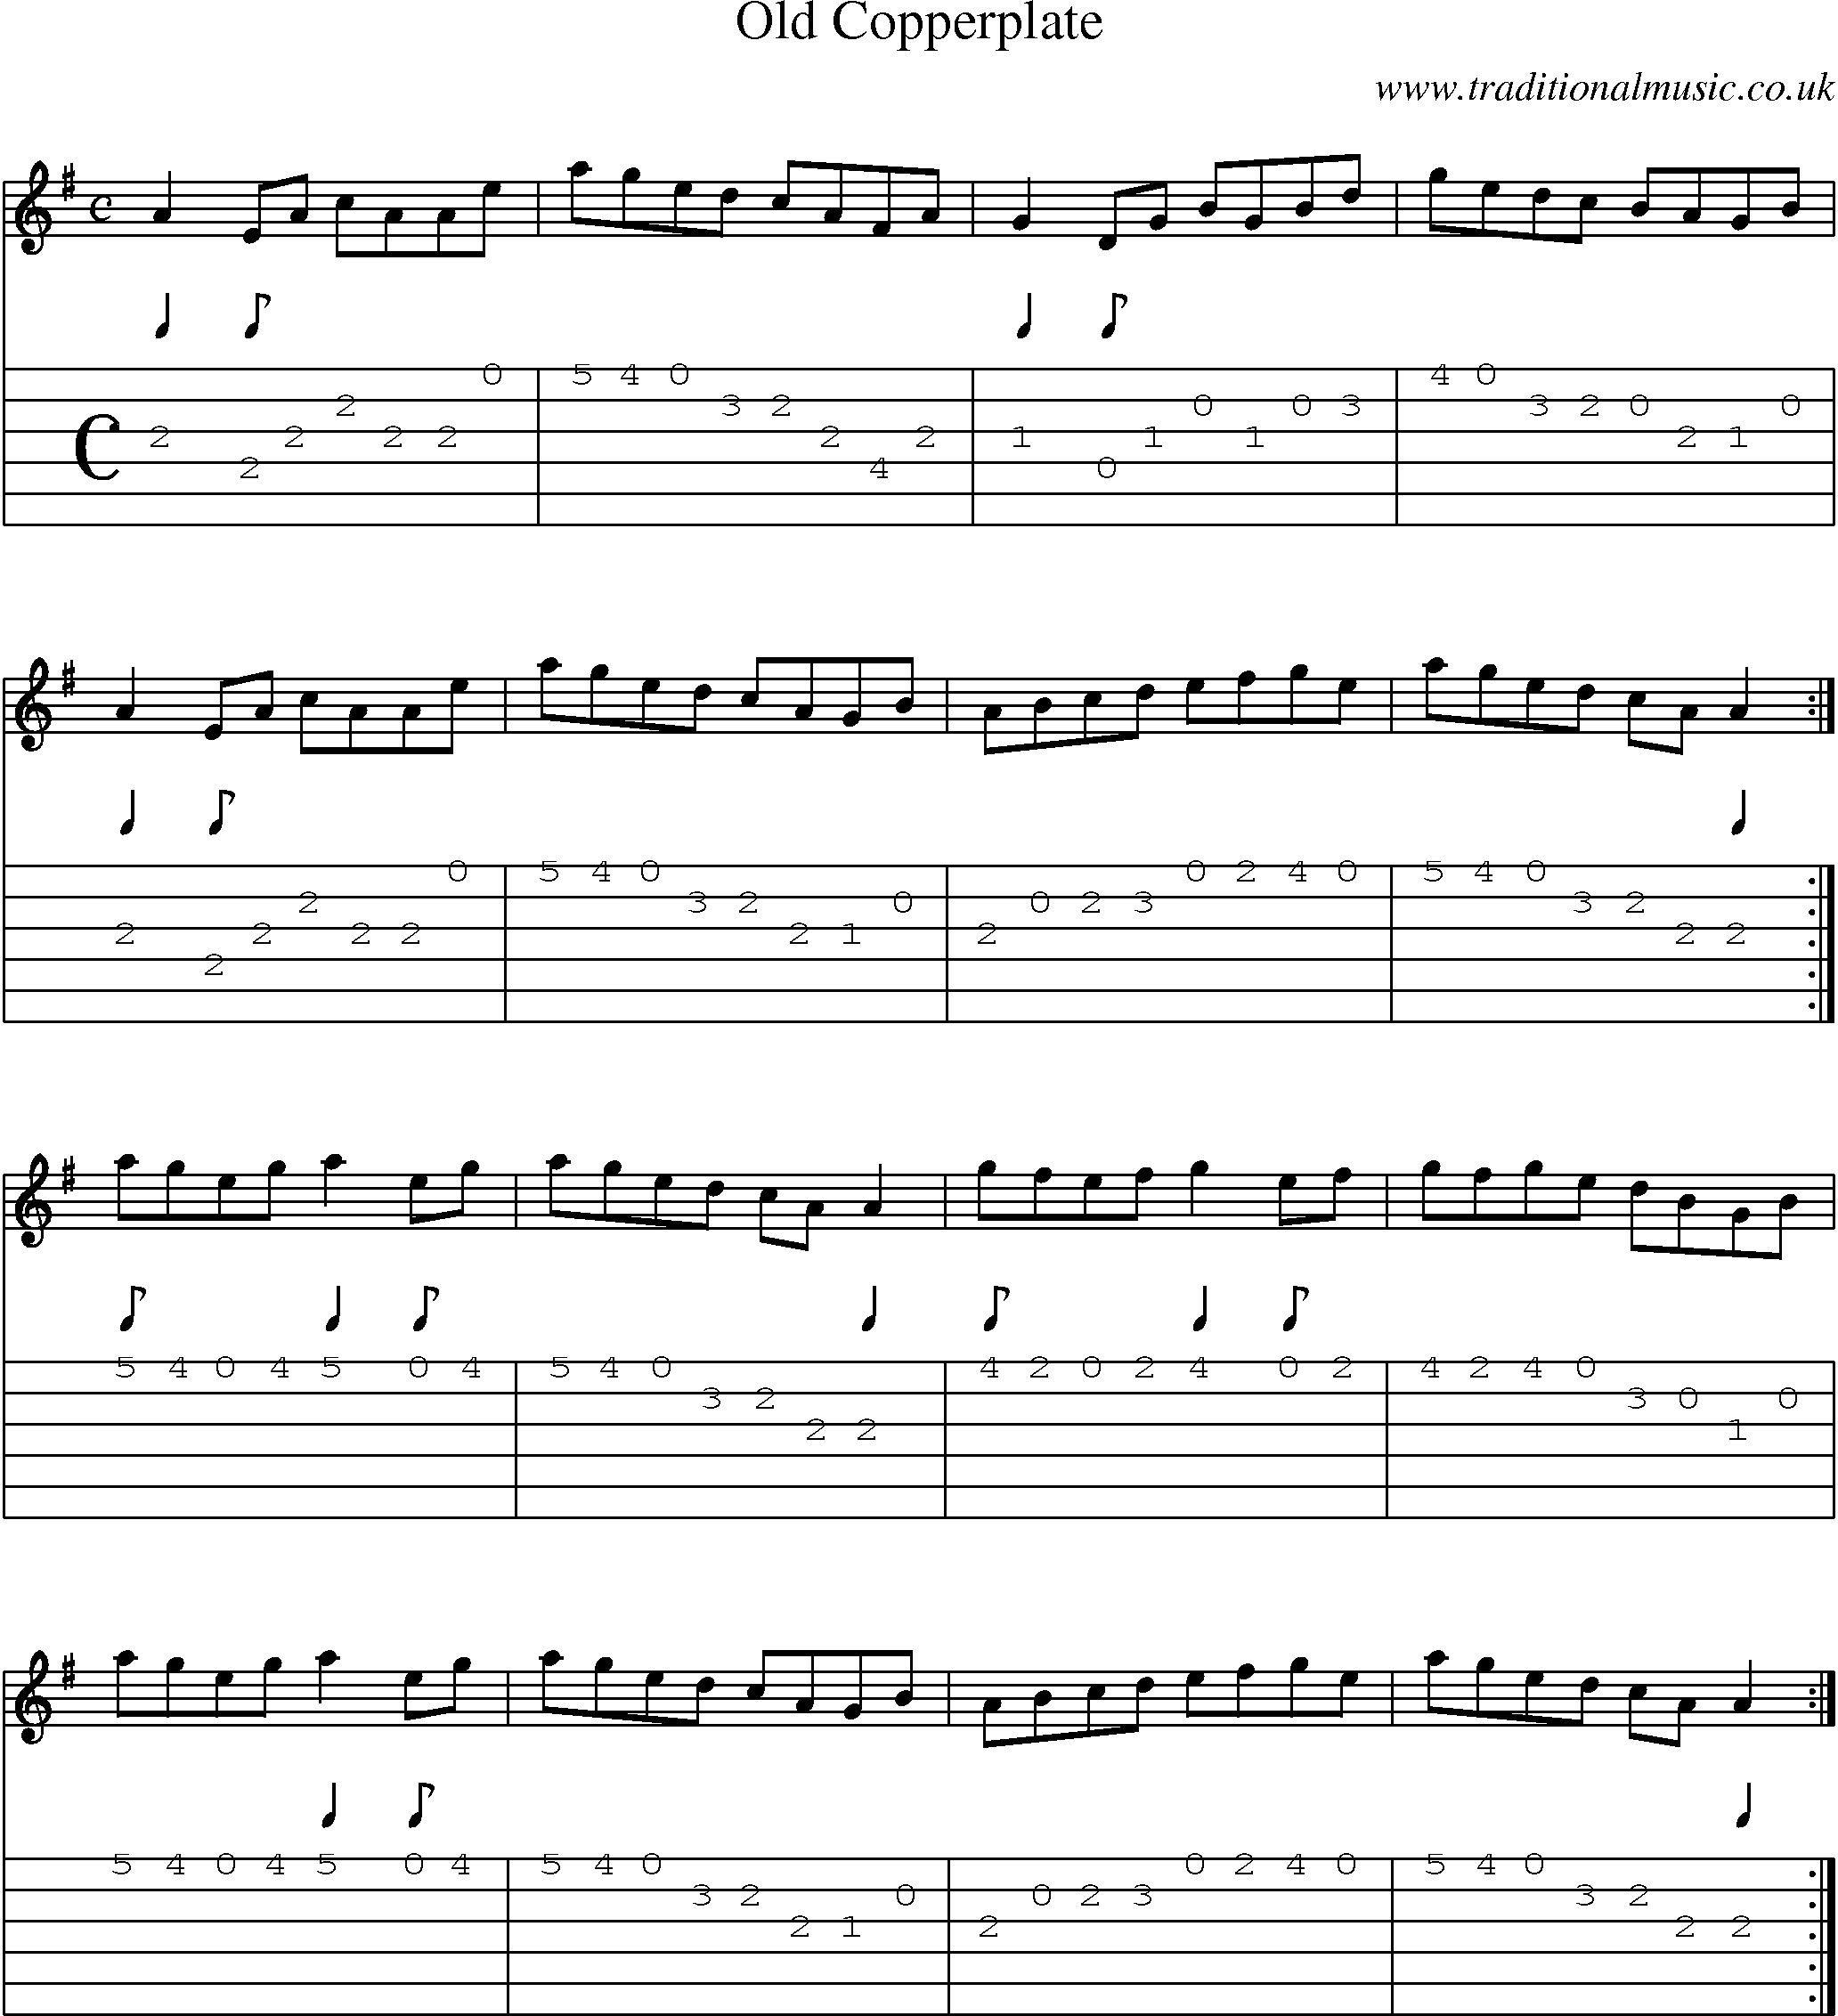 Music Score and Guitar Tabs for Old Copperplate